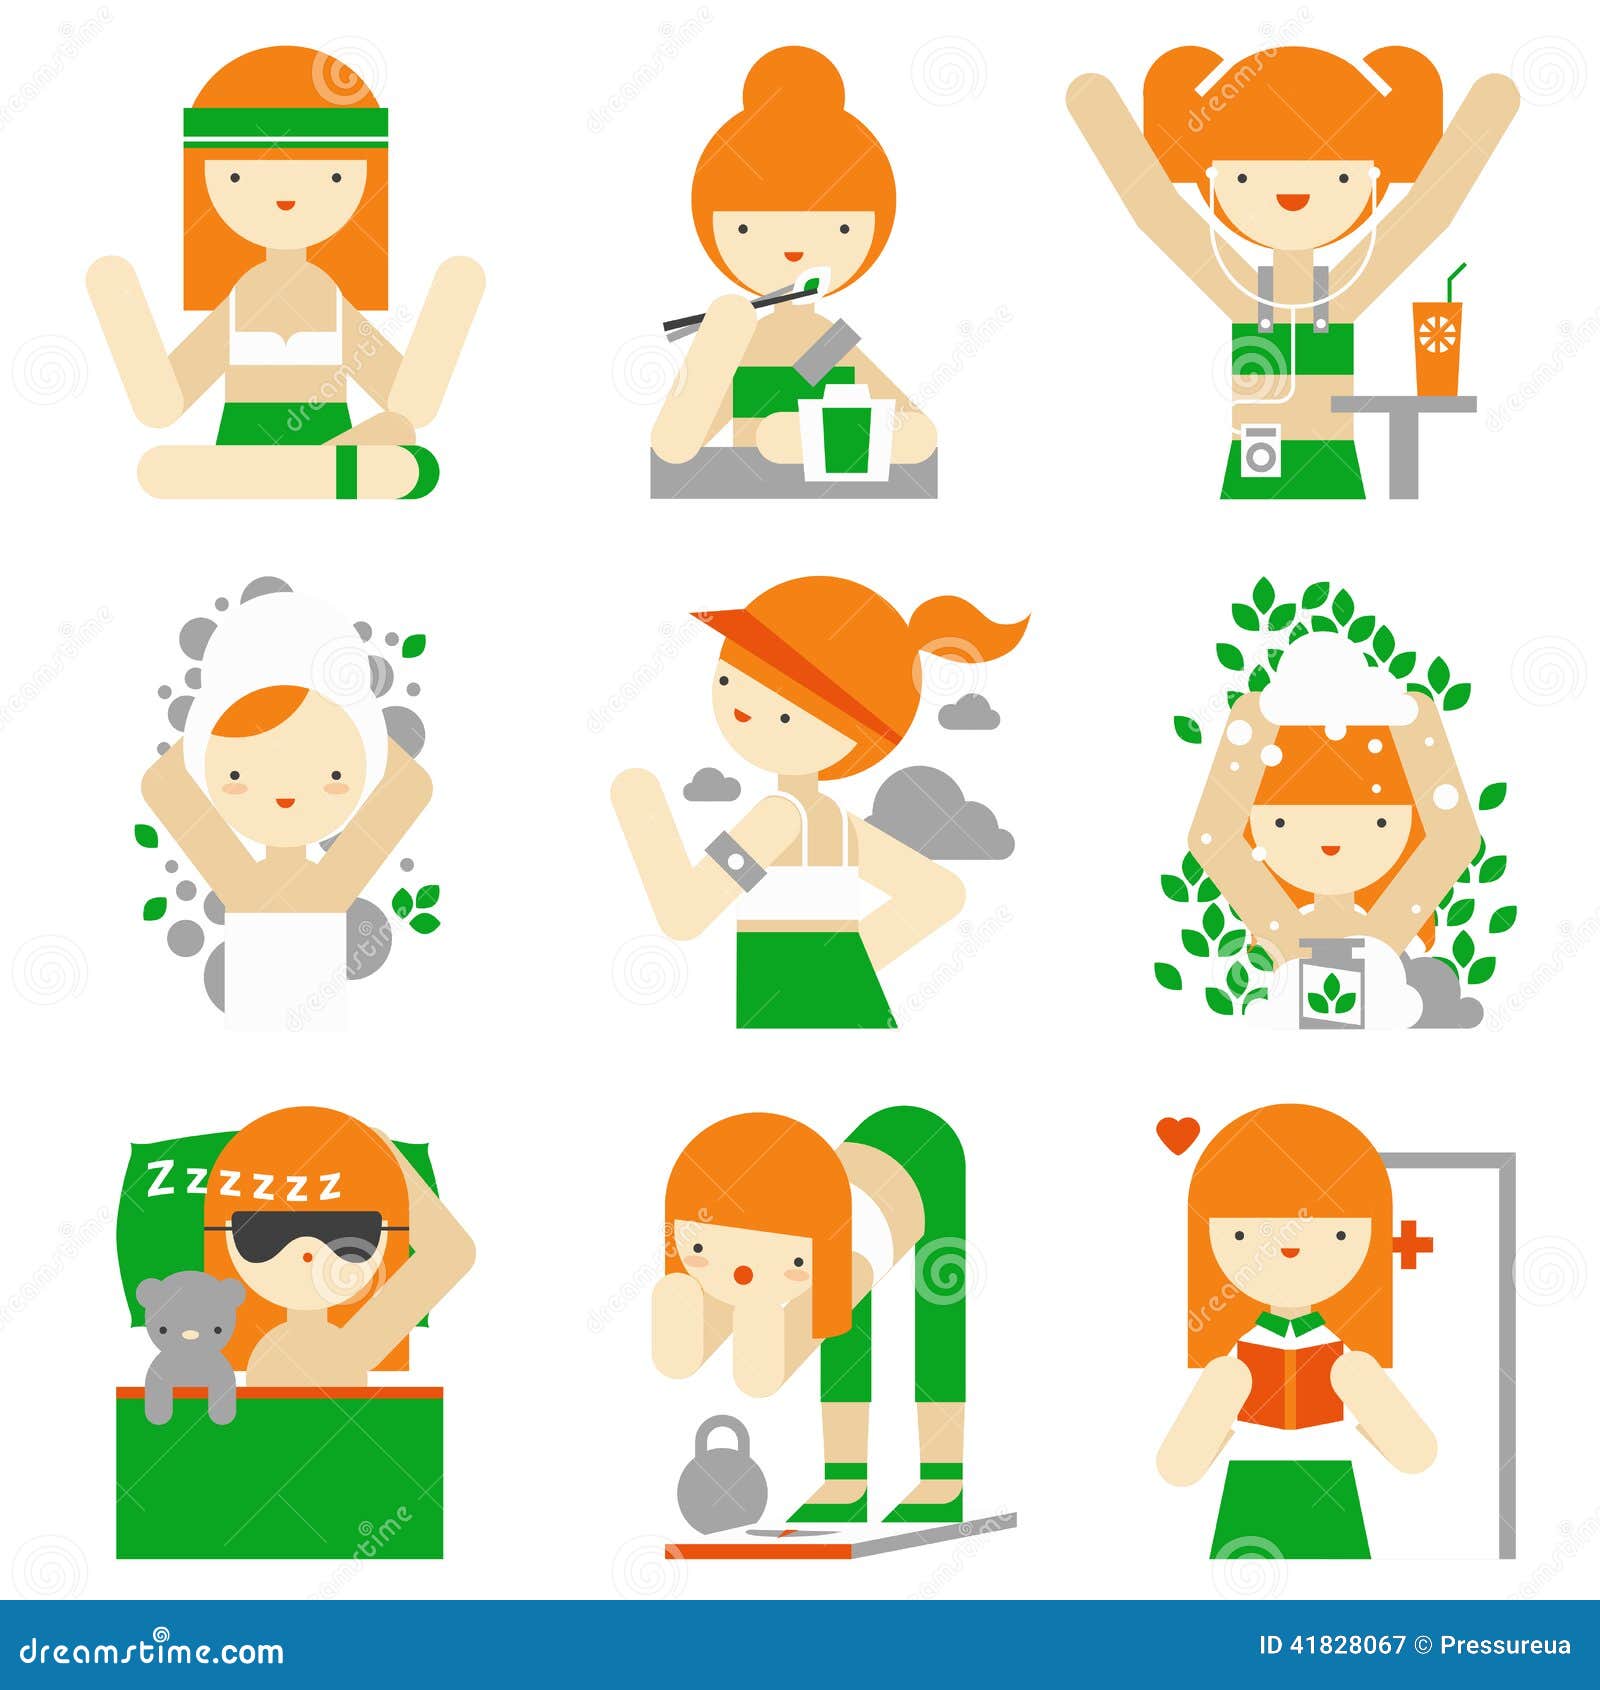 Healthy Lifestyle And Wellness Flat Icons Stock Vector - Image ...